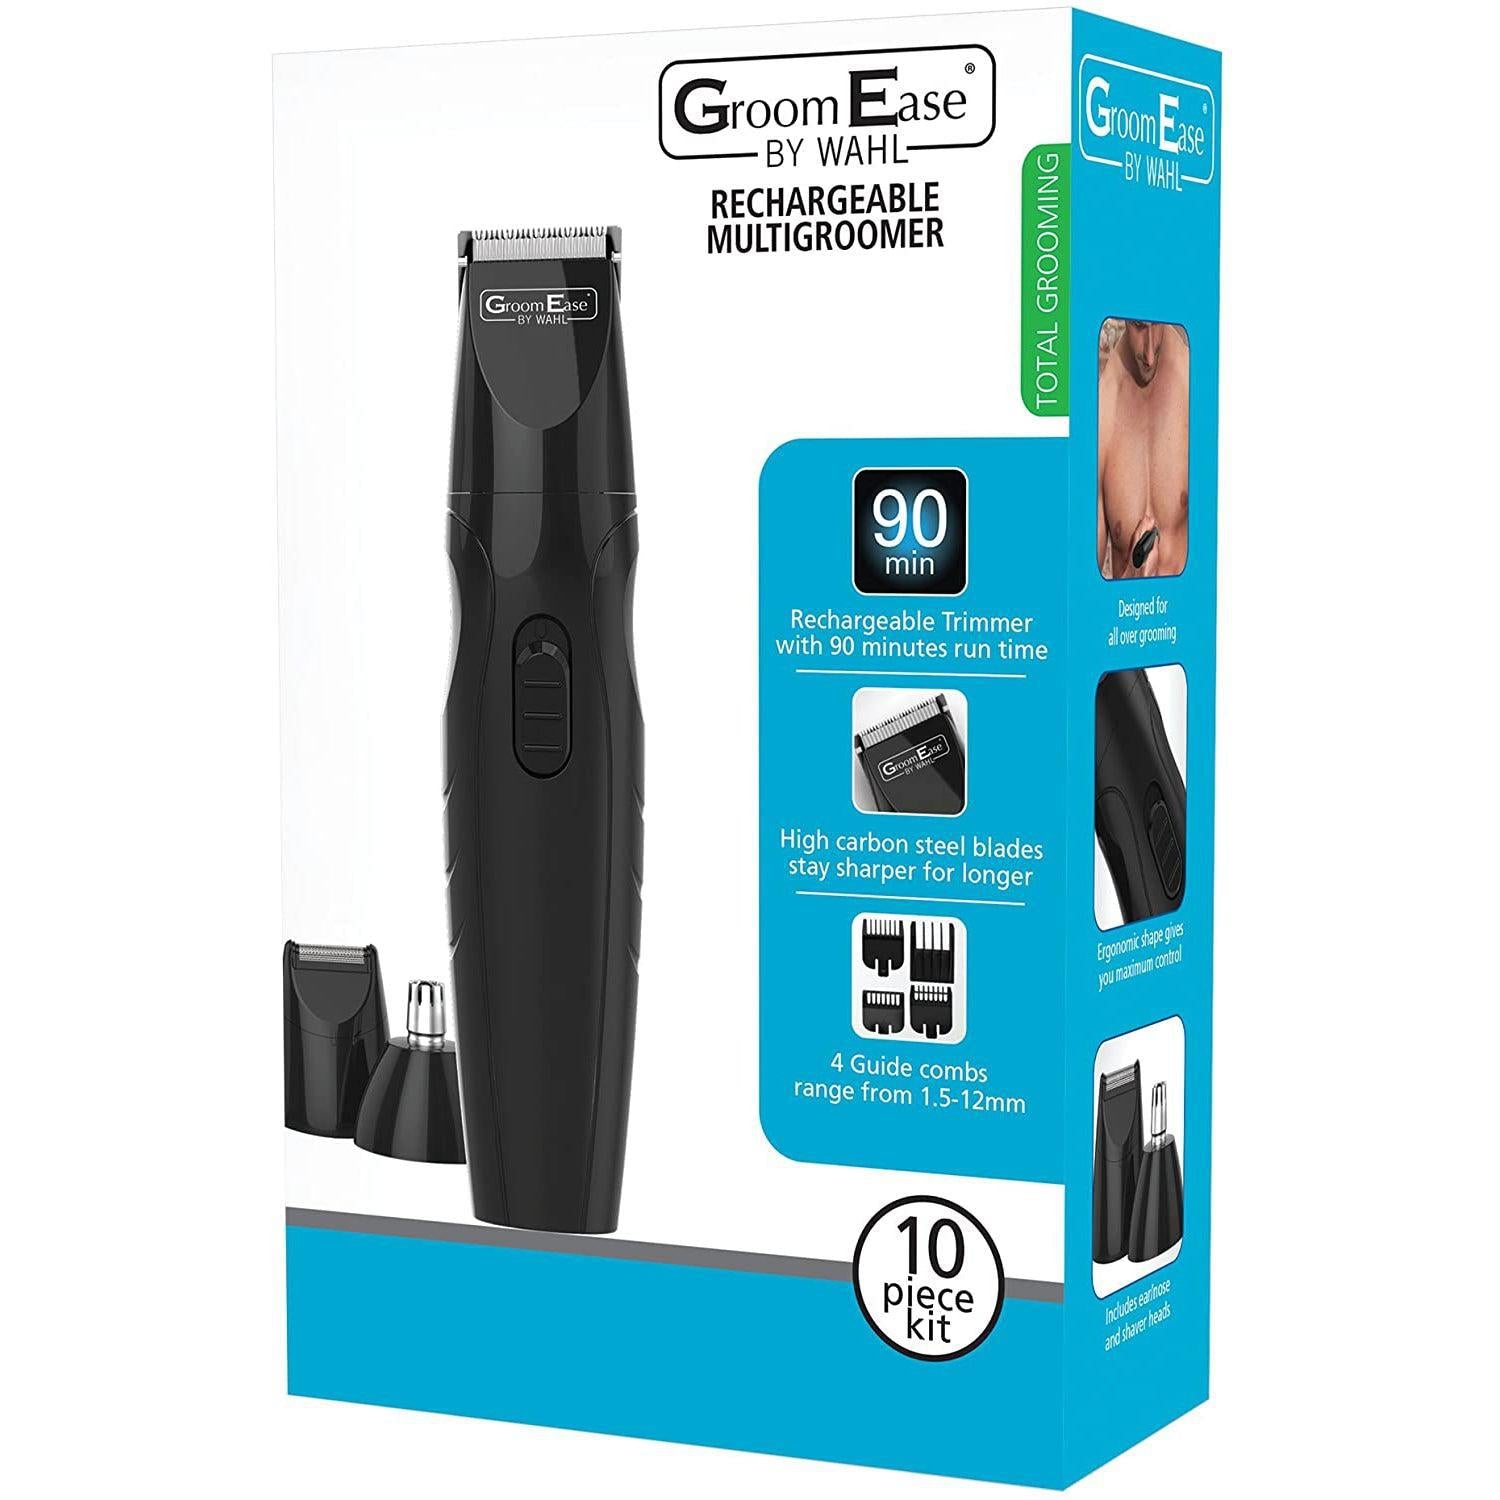 GroomEase by Wahl Rechargeable Multigroomer - Healthxpress.ie